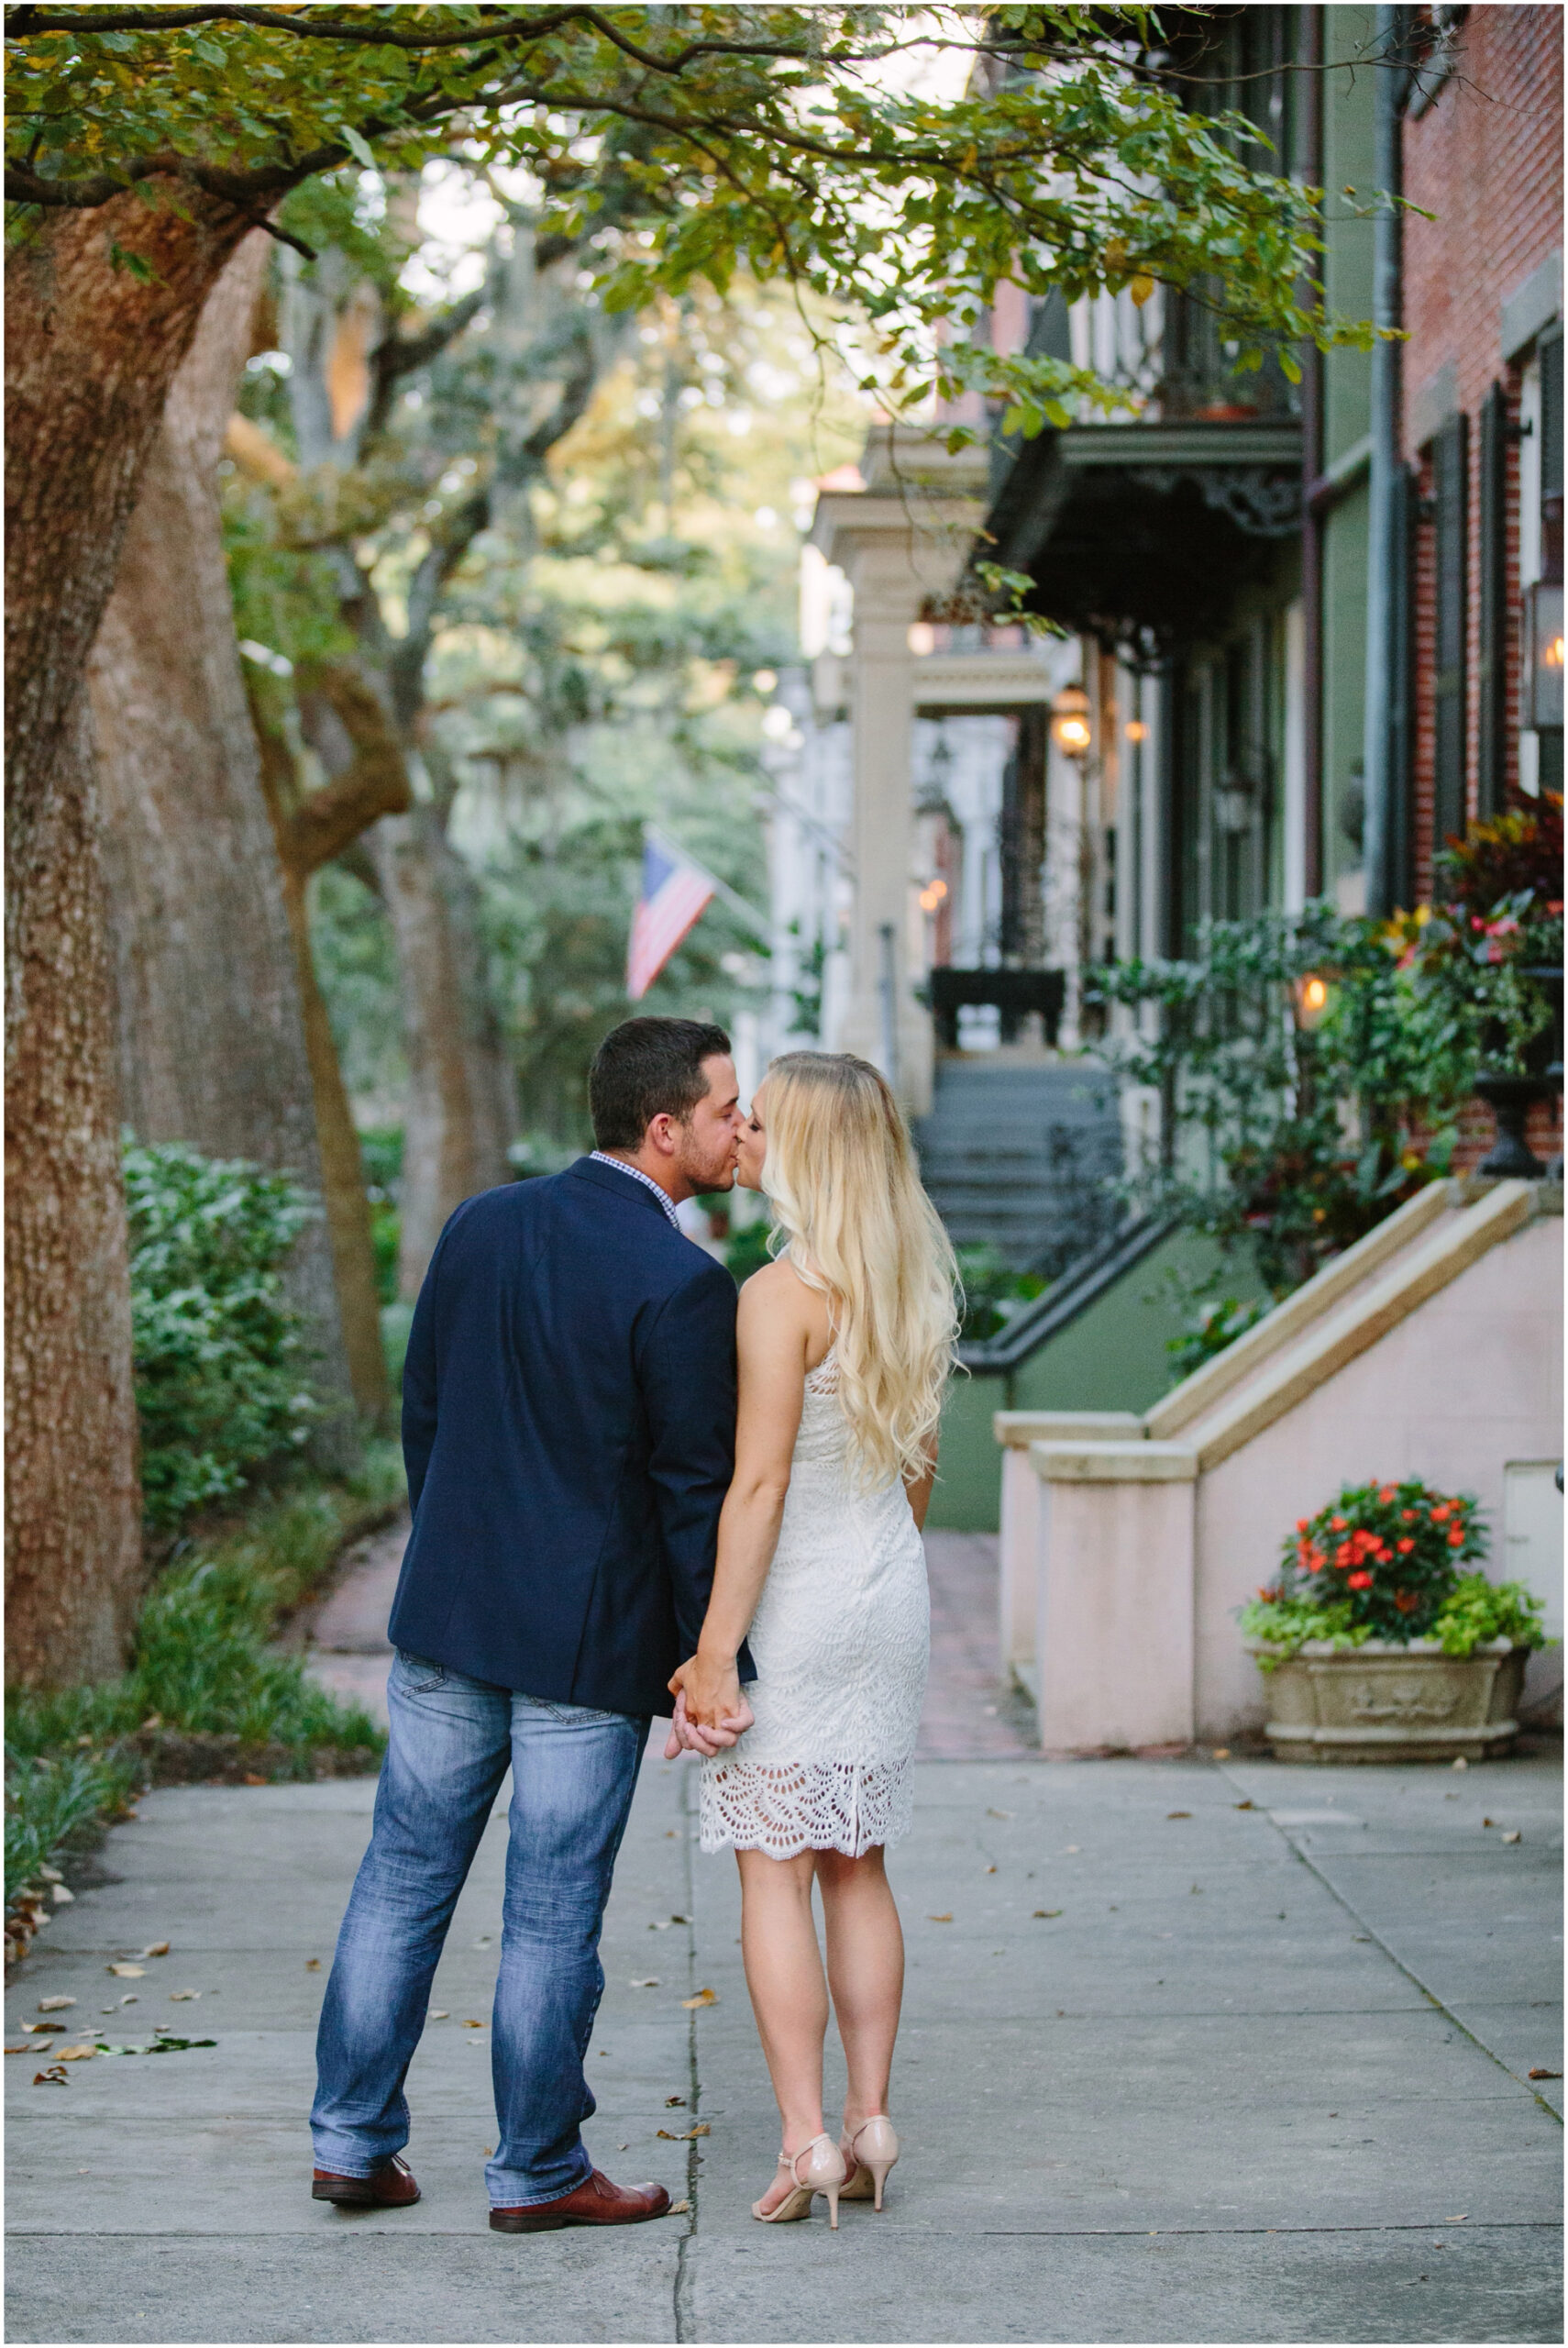 Wormsloe Historic Site and Downtown Savannah Engagement Session| Savannah, Georgia Wedding Photographers | Two Chics Photography | www.twochicsphotography.com